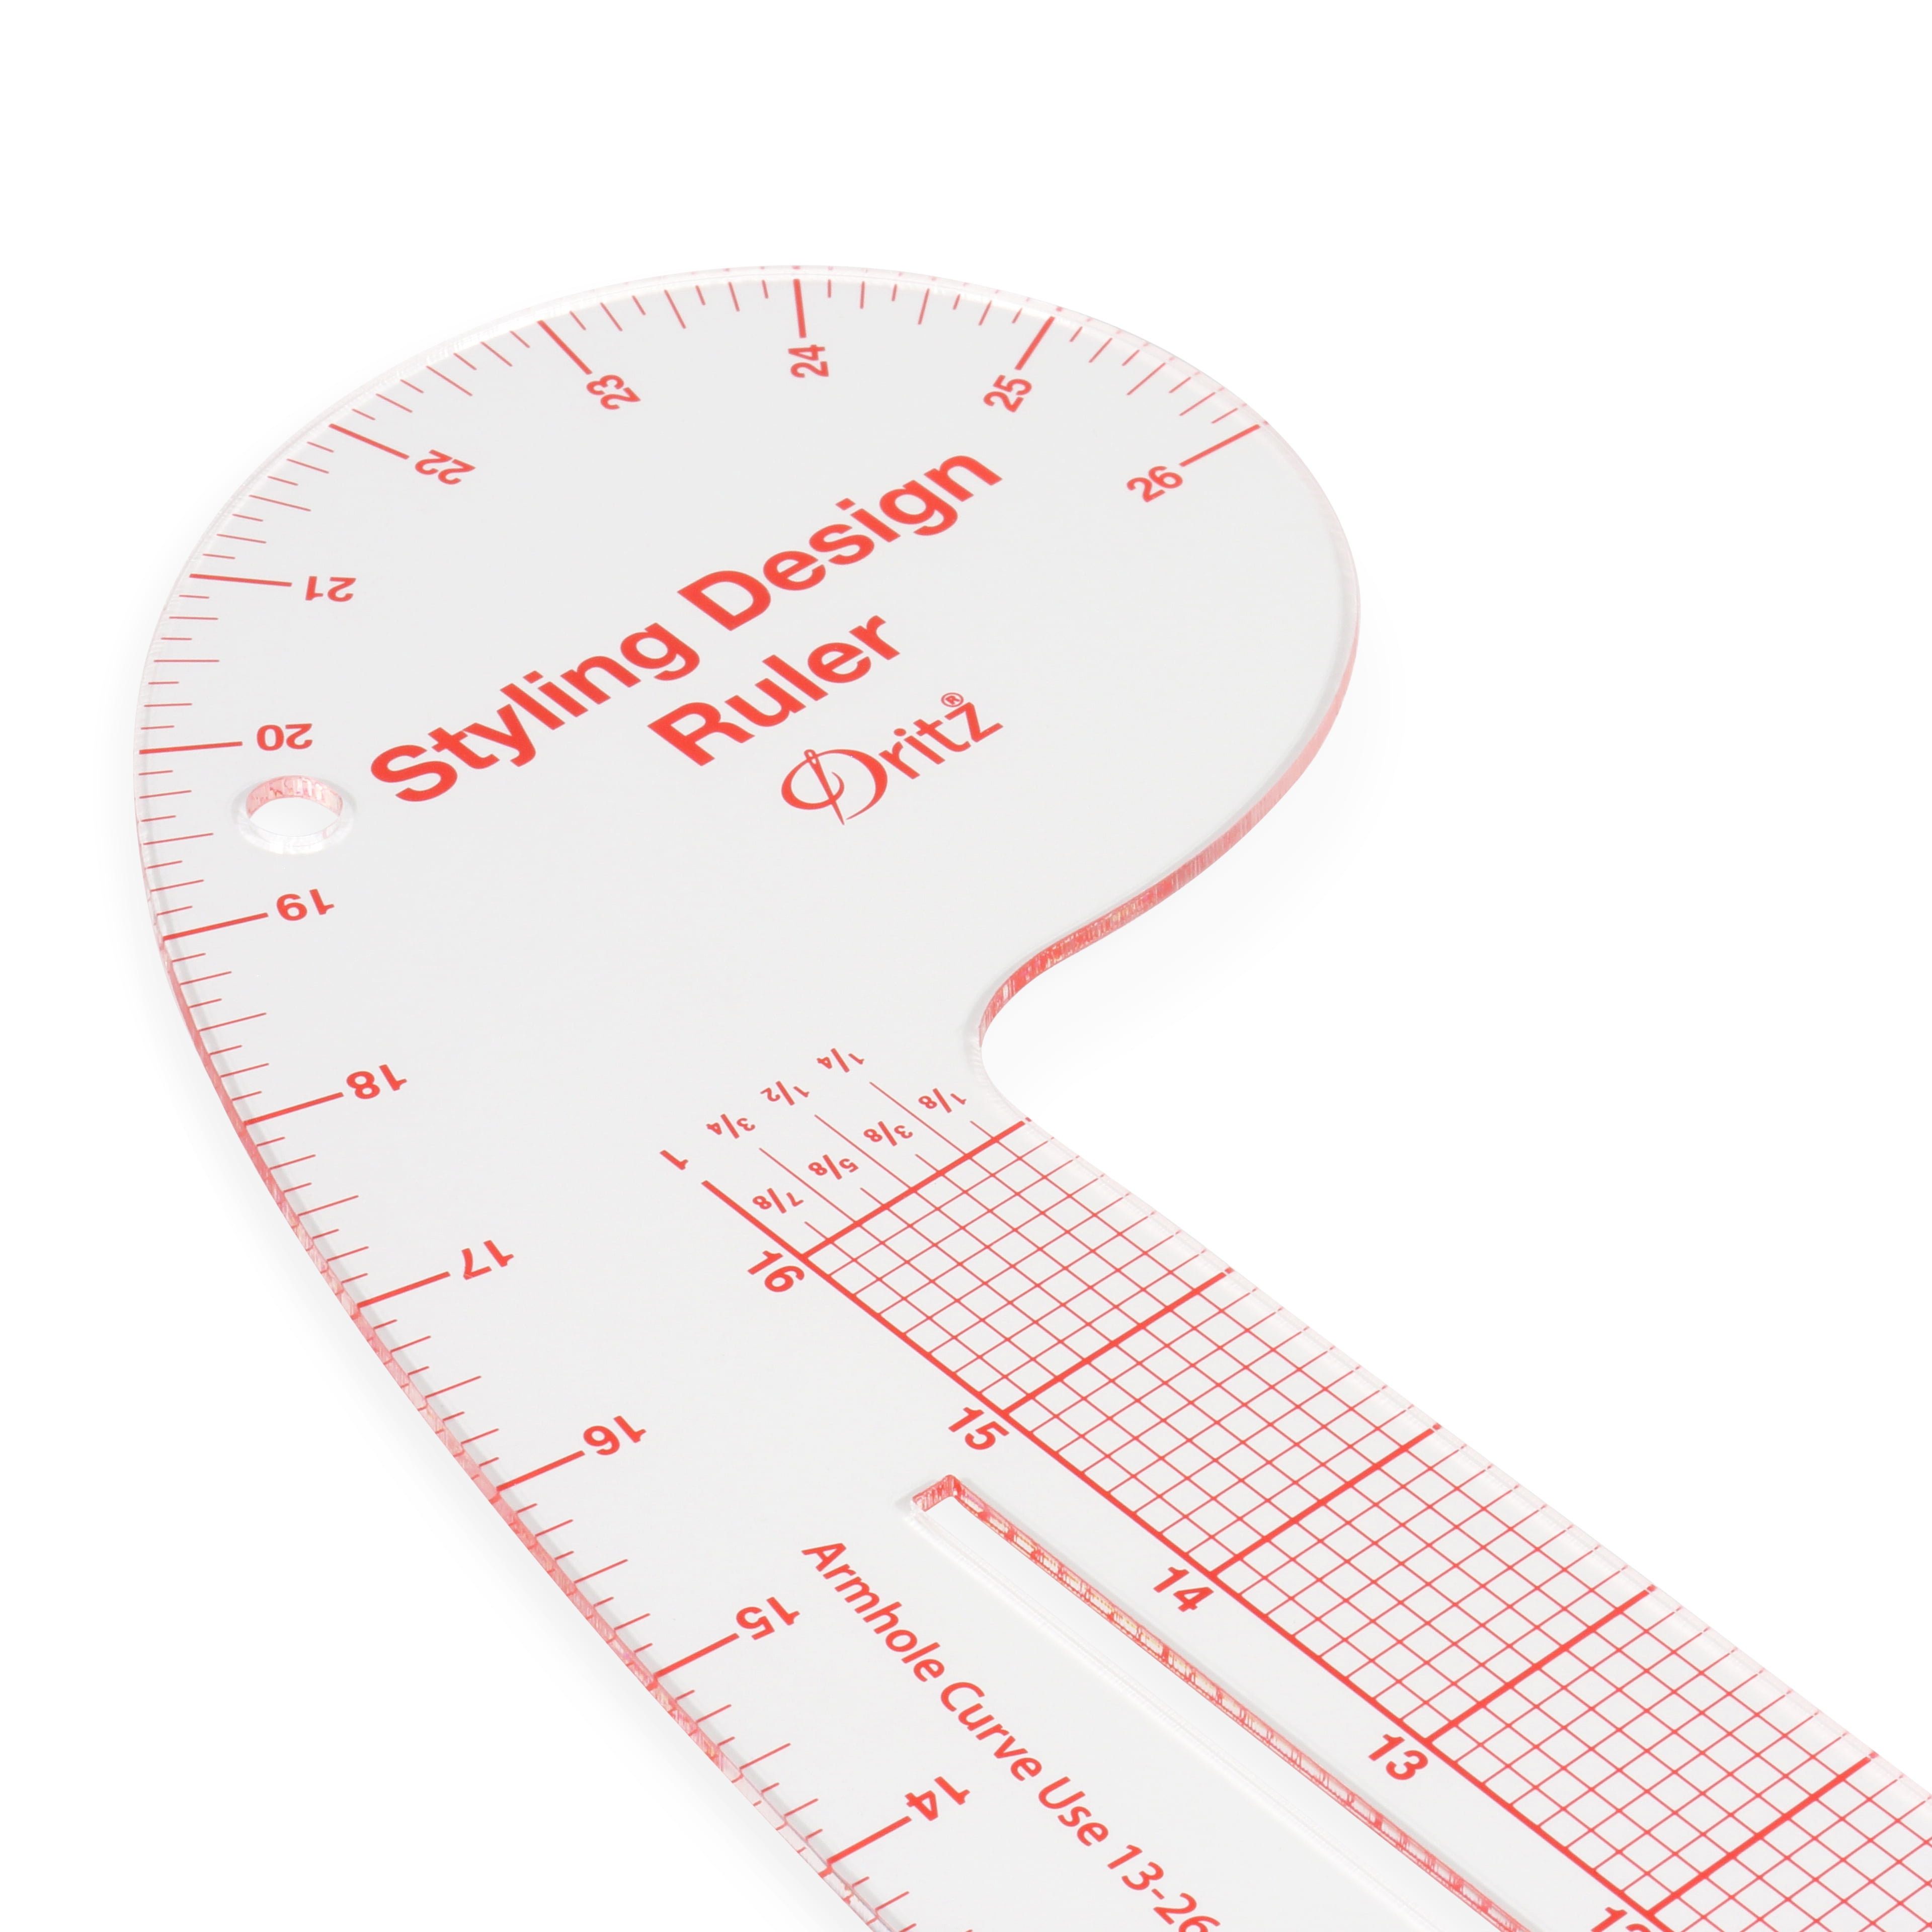 Dritz Trio with Styling Design, Curve & Hip Curve Sewing Ruler Set, Clear